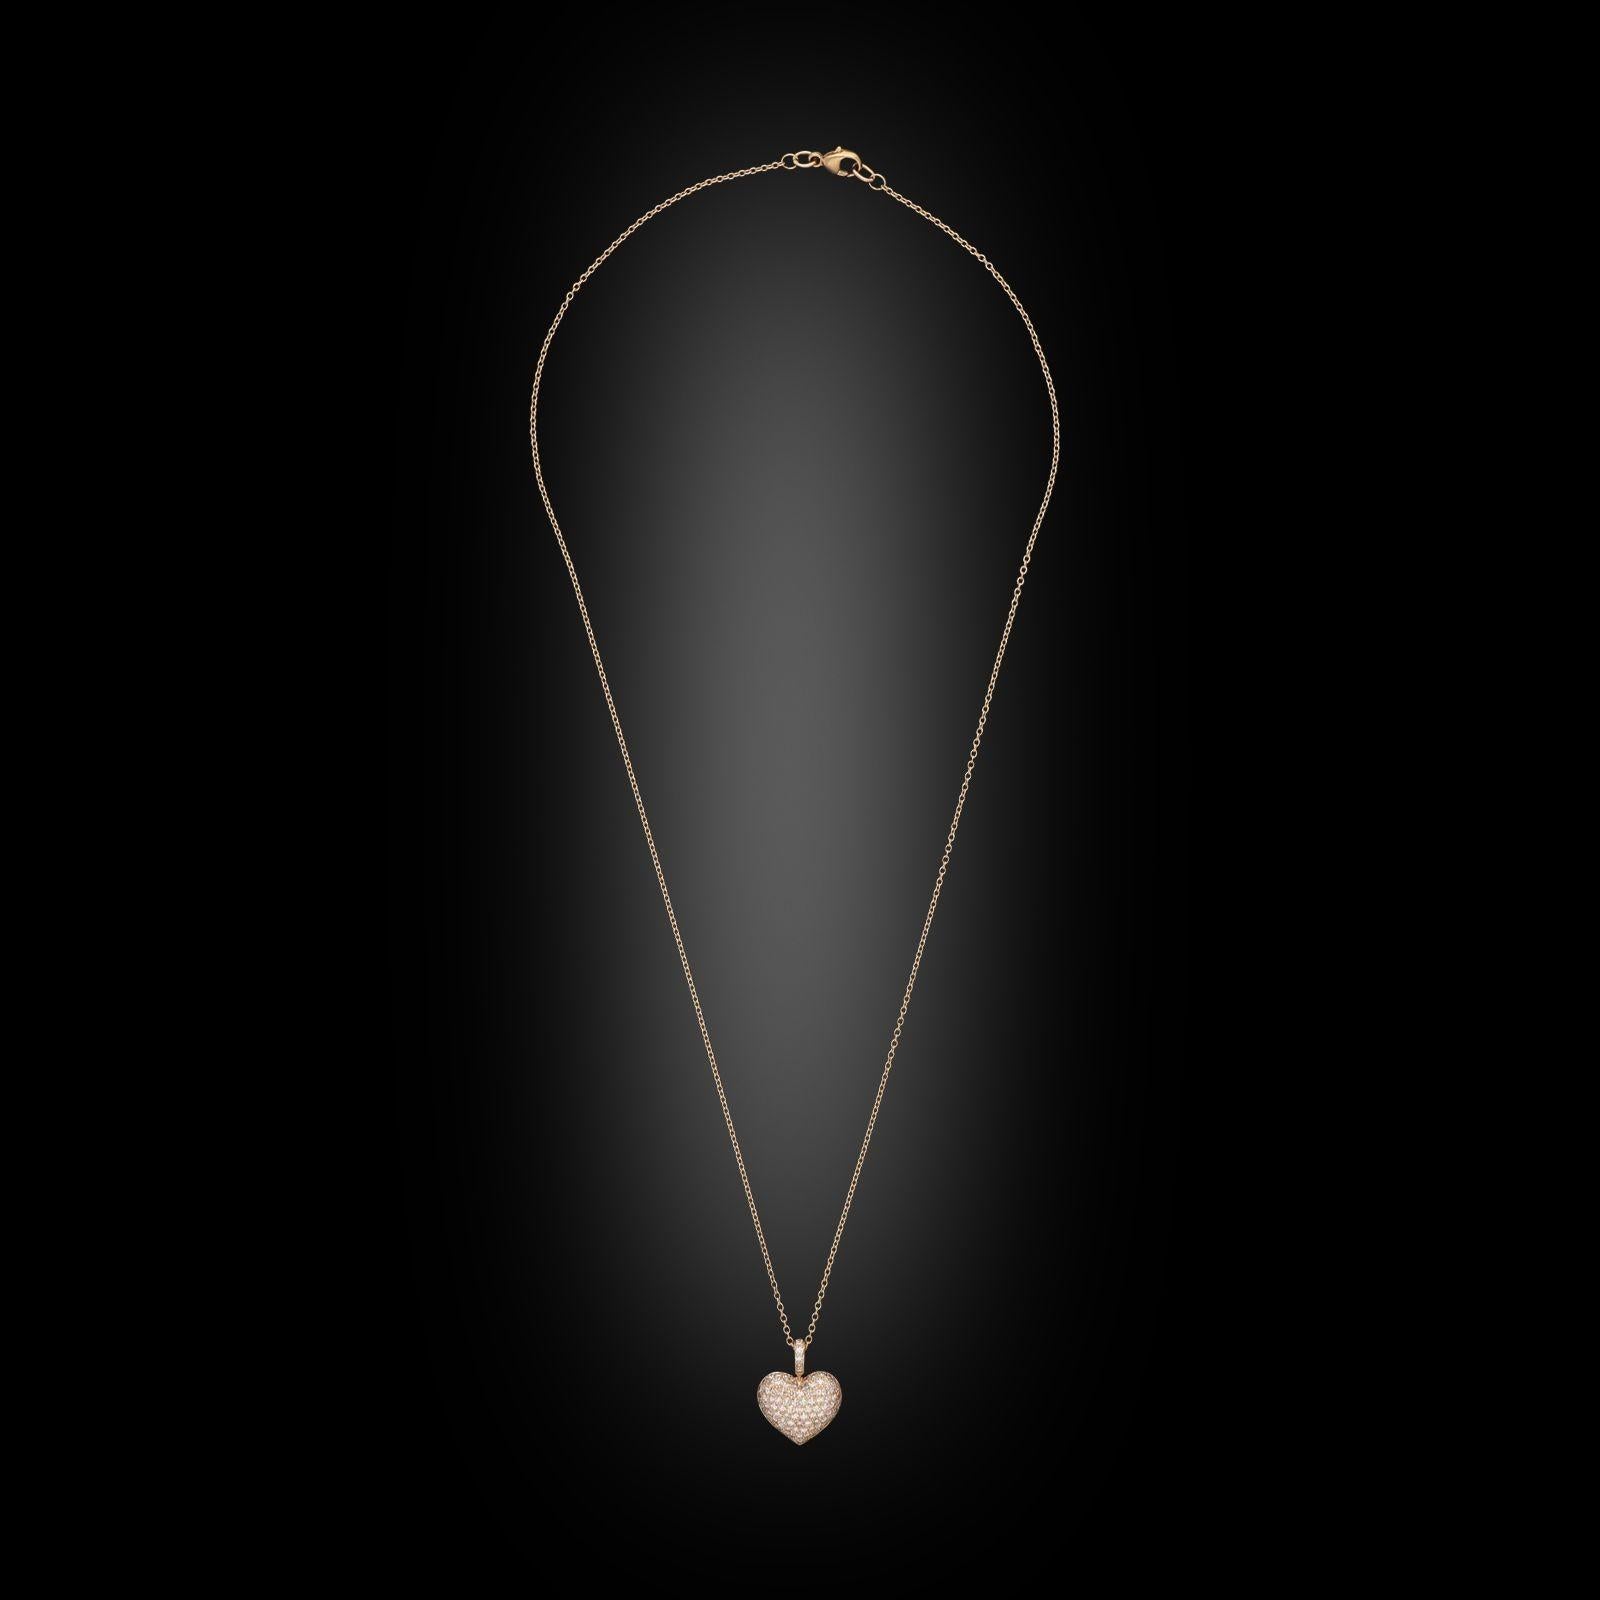 A pink diamond and rose gold heart shaped pendant by Hancocks, the heart with domed profile pavé set across the front with single cut pink diamonds in 18ct rose gold, suspended from a diamond set bale, hung from an 18” rose gold trace chain. This